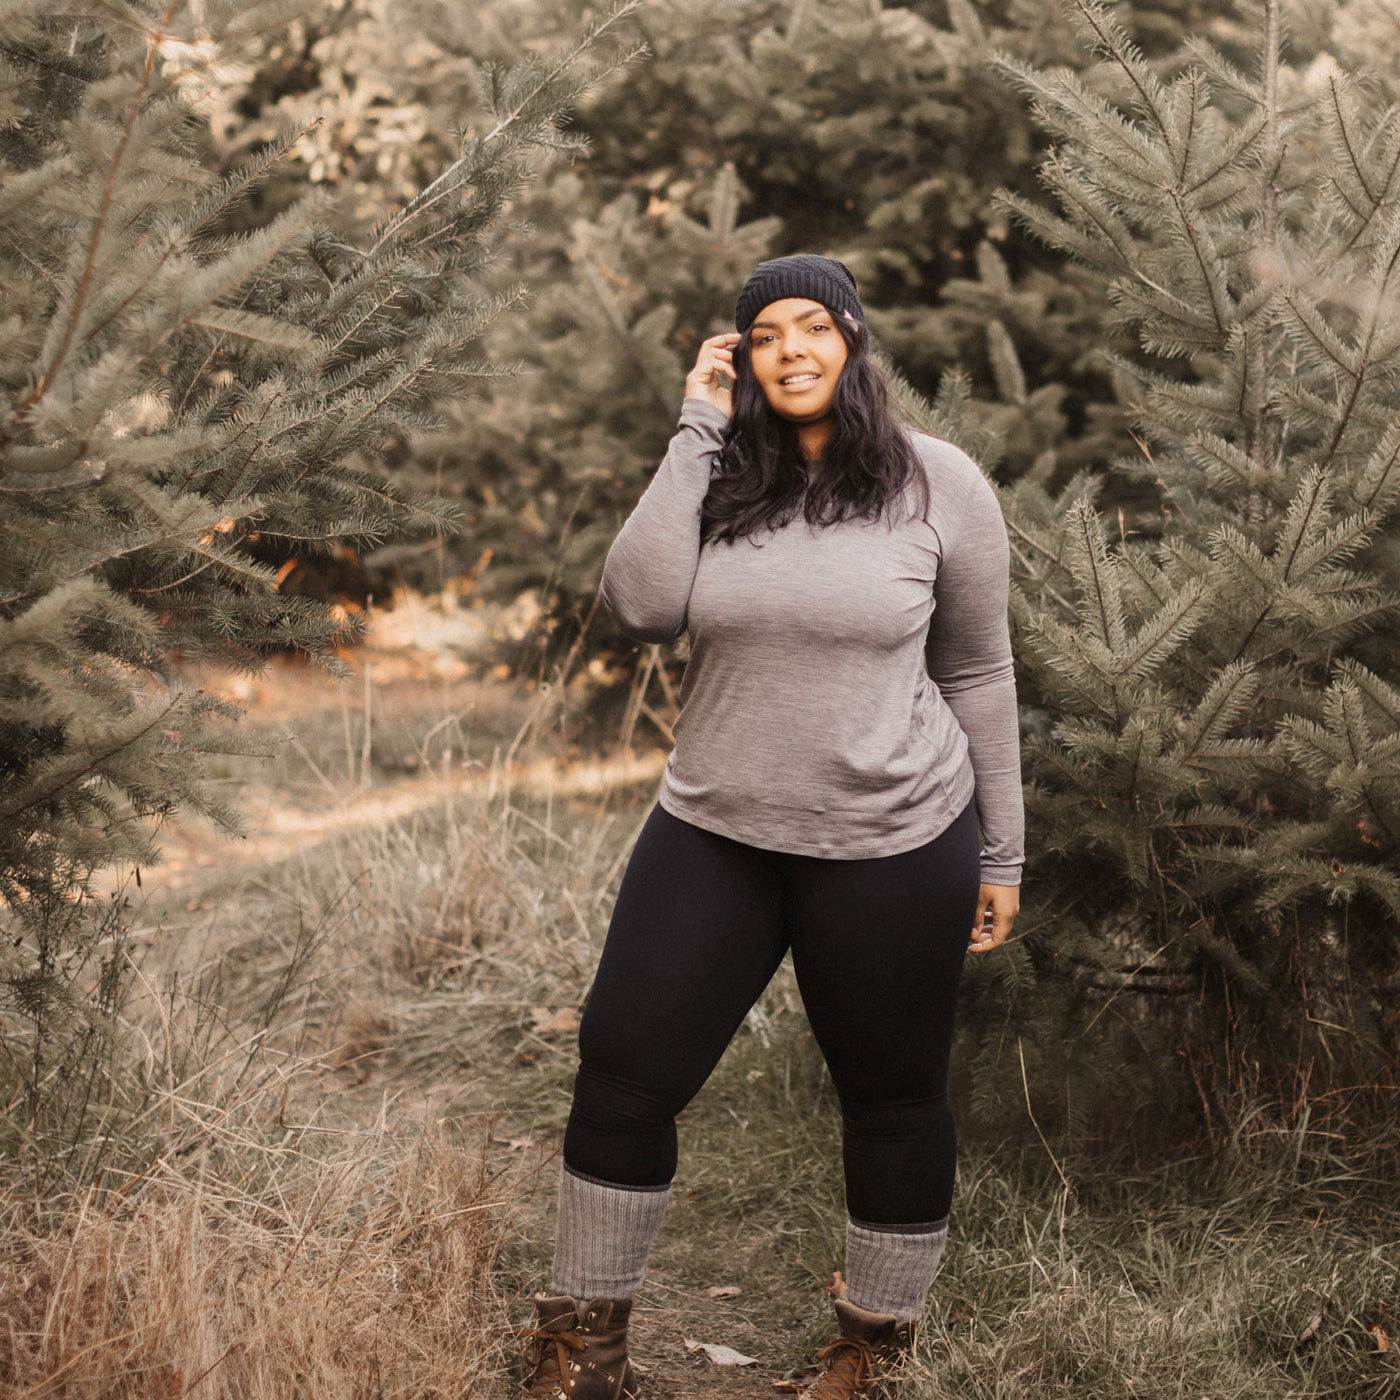 What to Wear for Winter Hiking: A Prepared Girl's Guide – Outdoor Adventure  Travel Guides & Tips | This Big Wild World